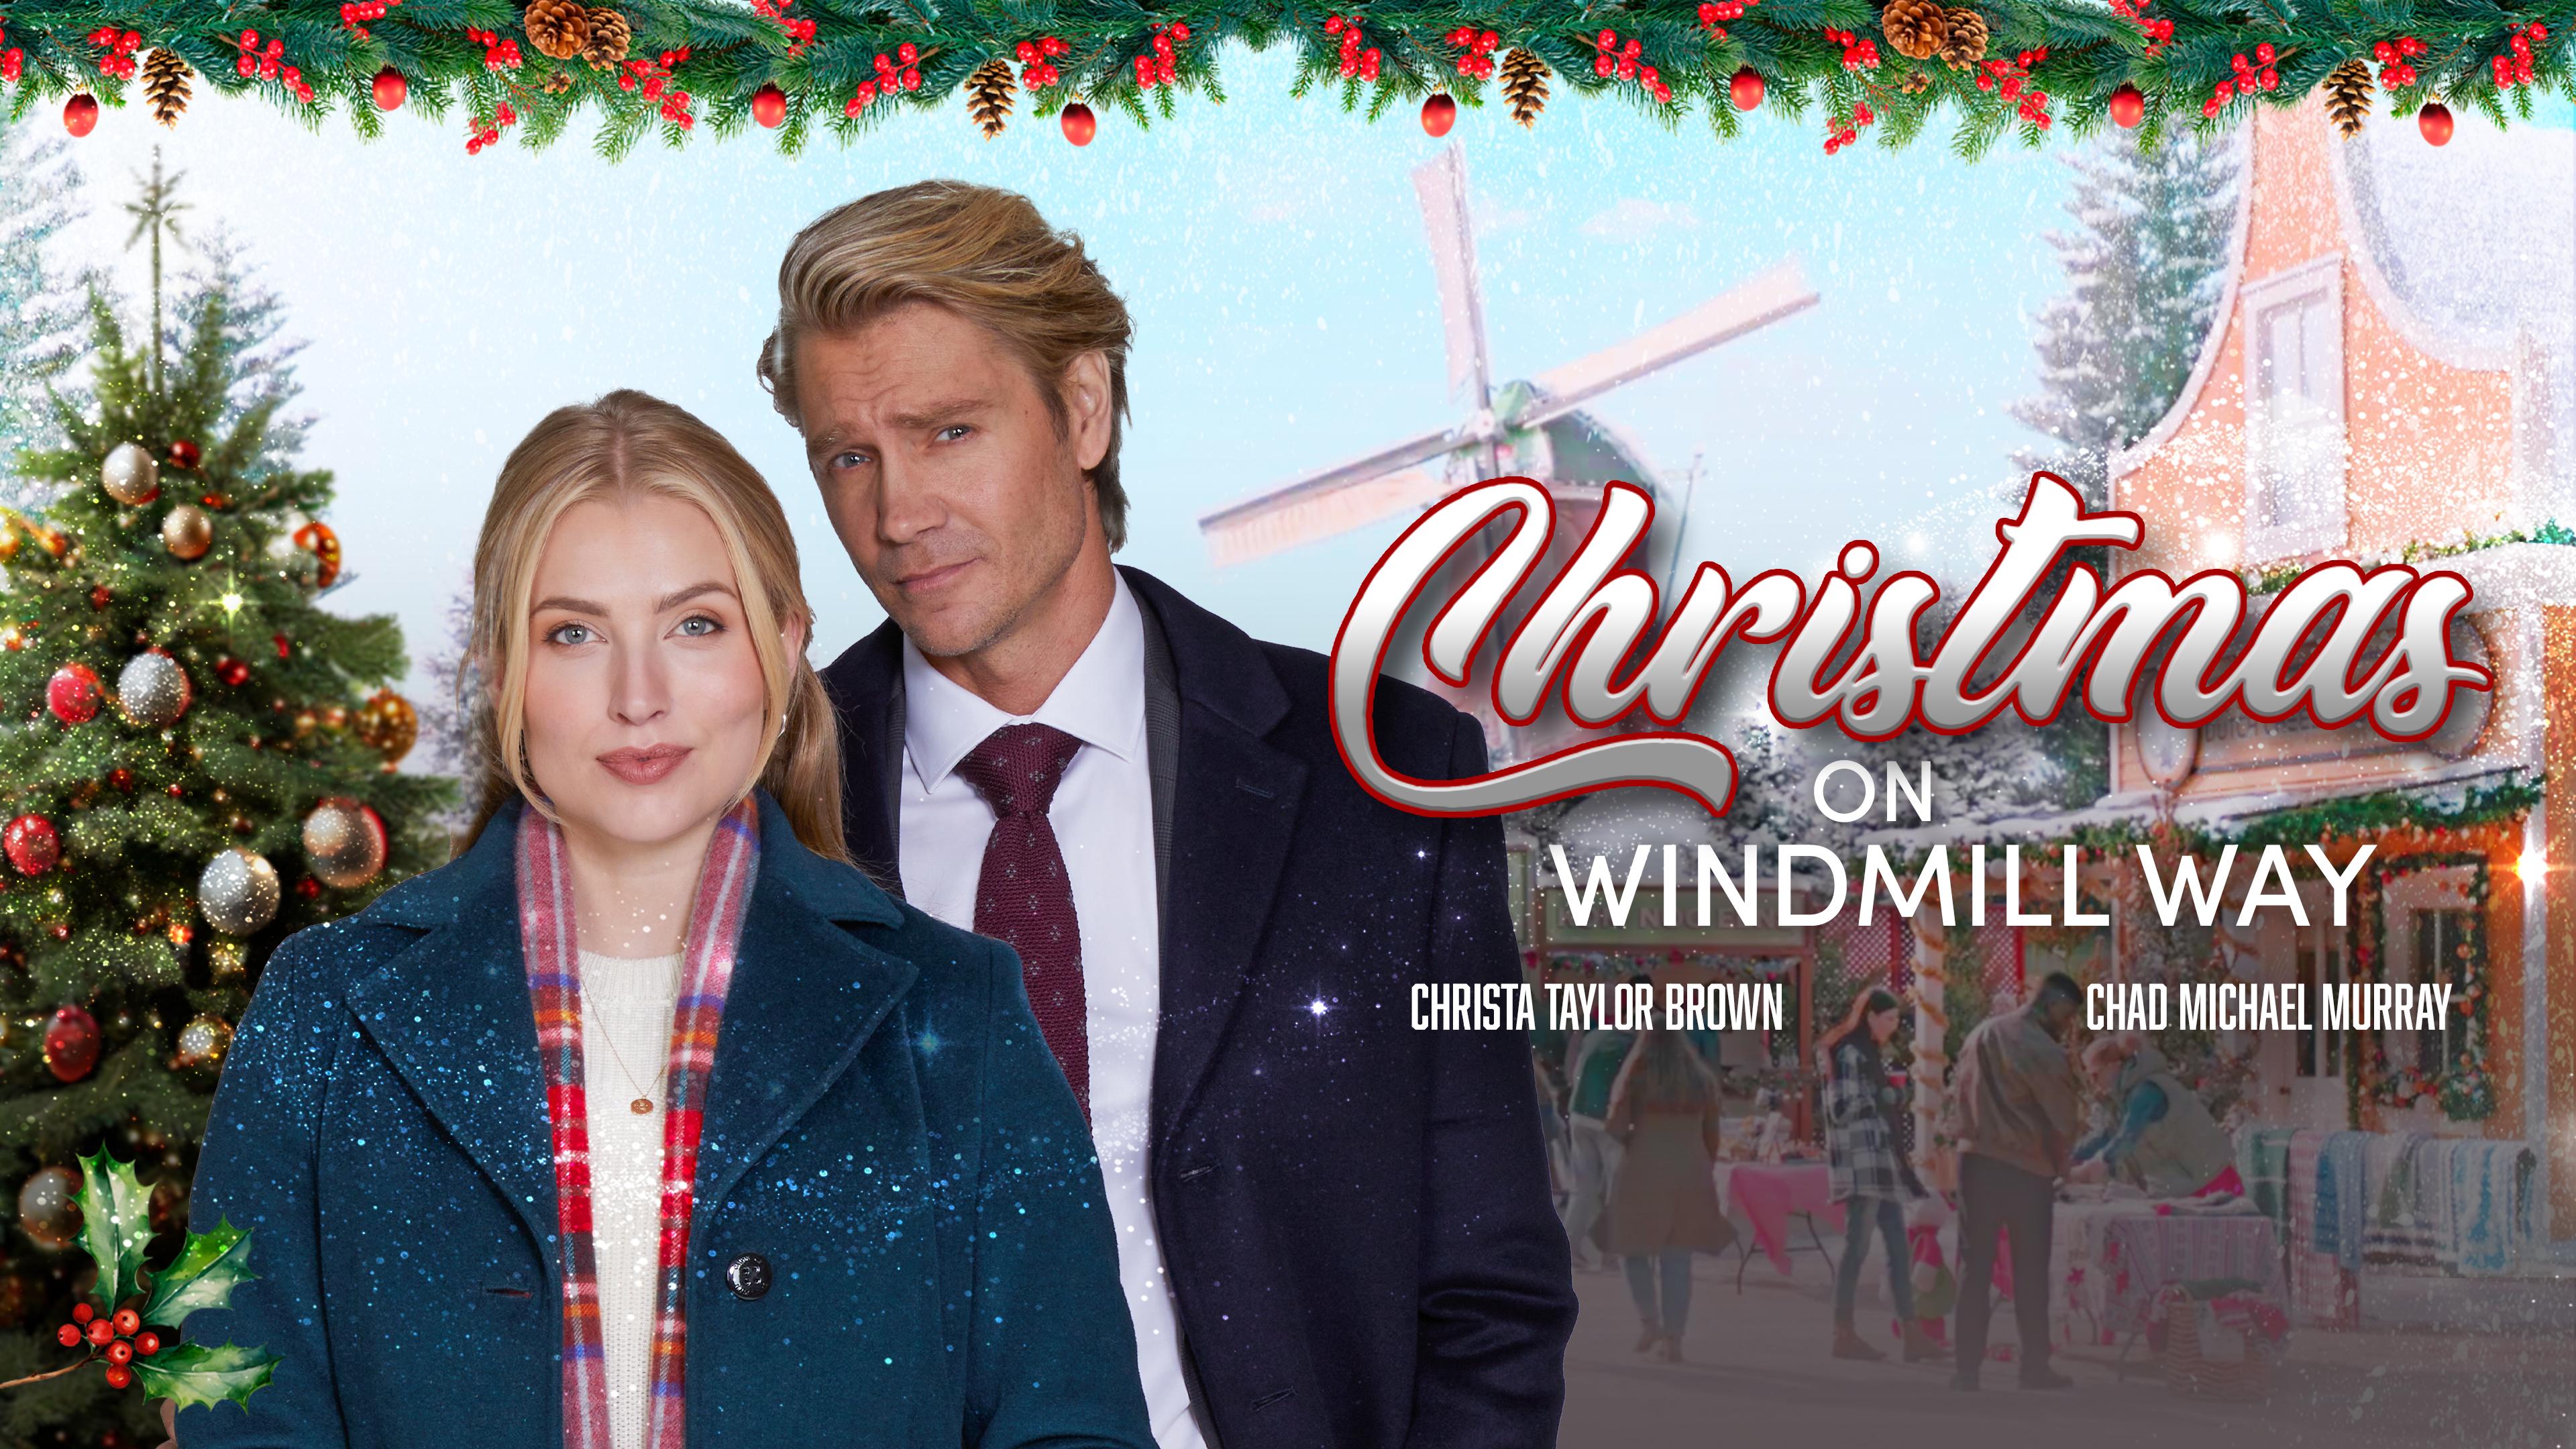 Watch Christmas on Windmill Way Streaming Online on Philo (Free Trial)